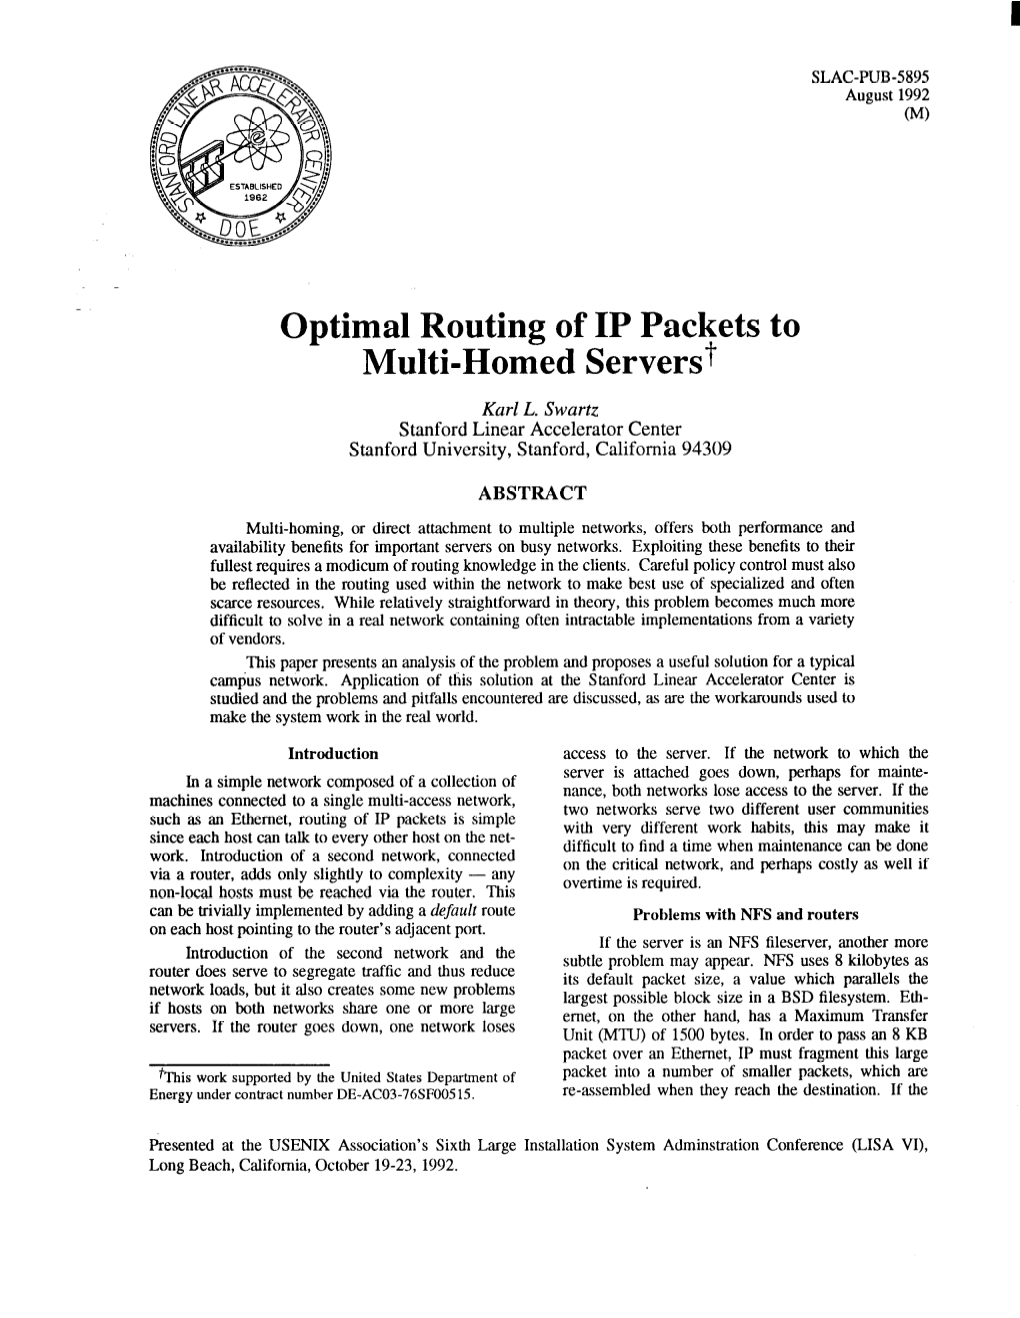 Optimal Routing of IP Packets to Multi-Homed Servers? Karl L